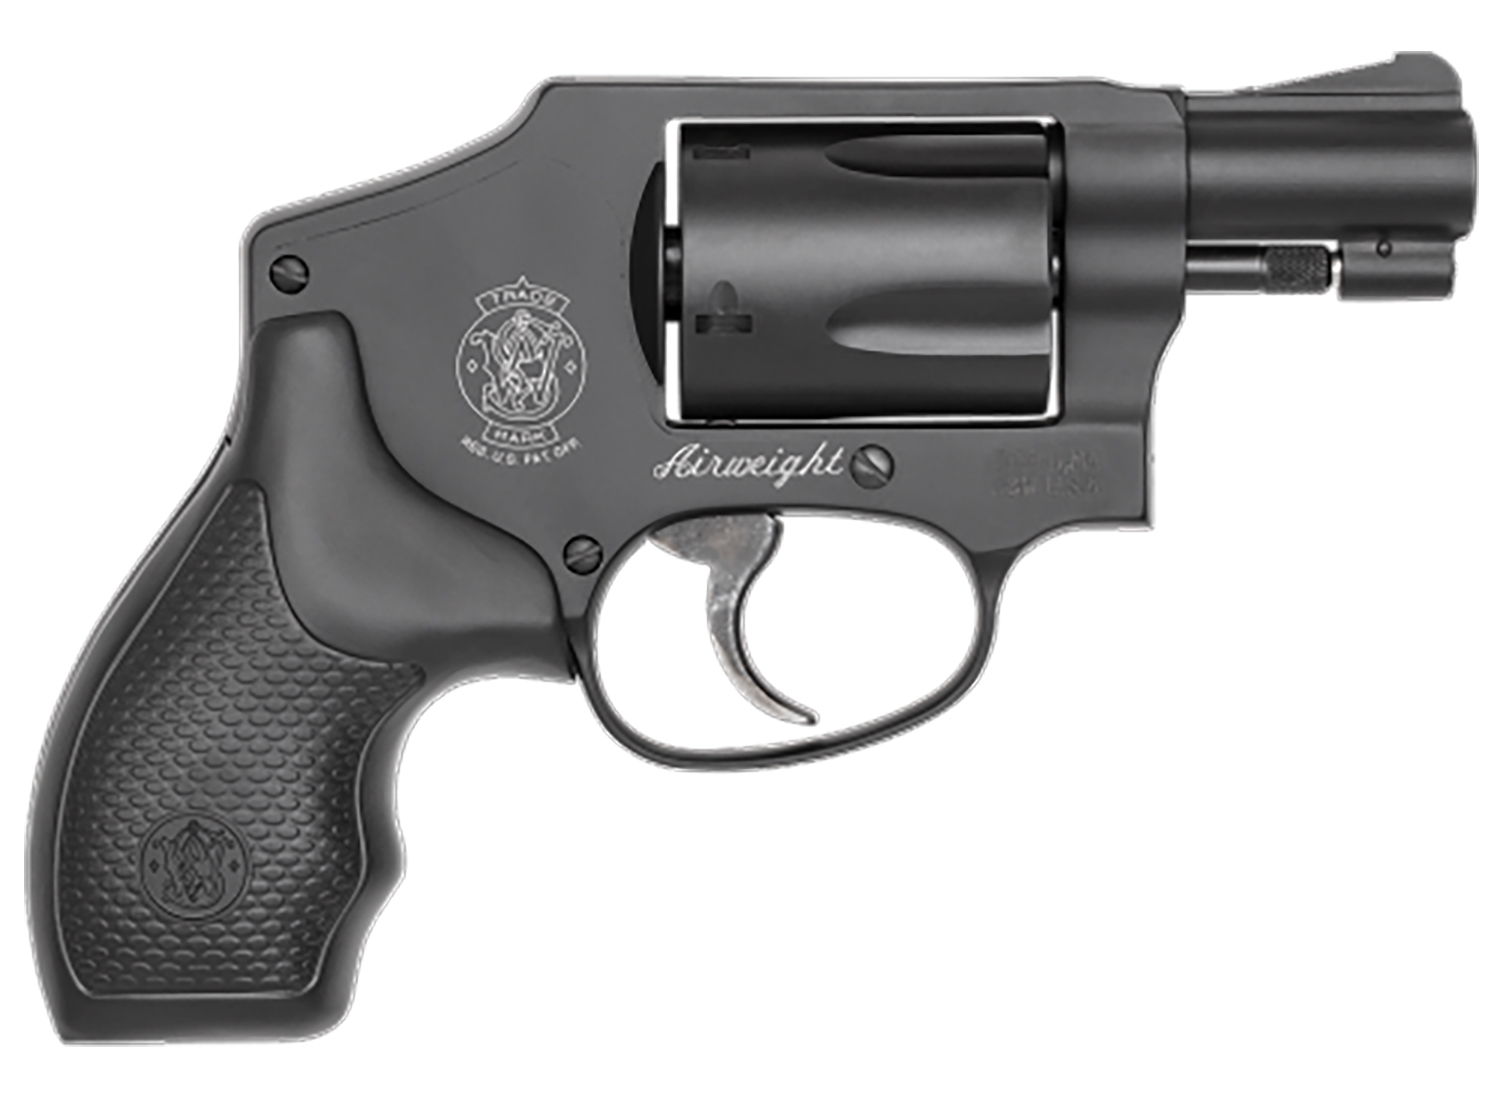 Smith & Wesson 162810 Model 442 Airweight 38 S&W Spl +P 5rd 1.88